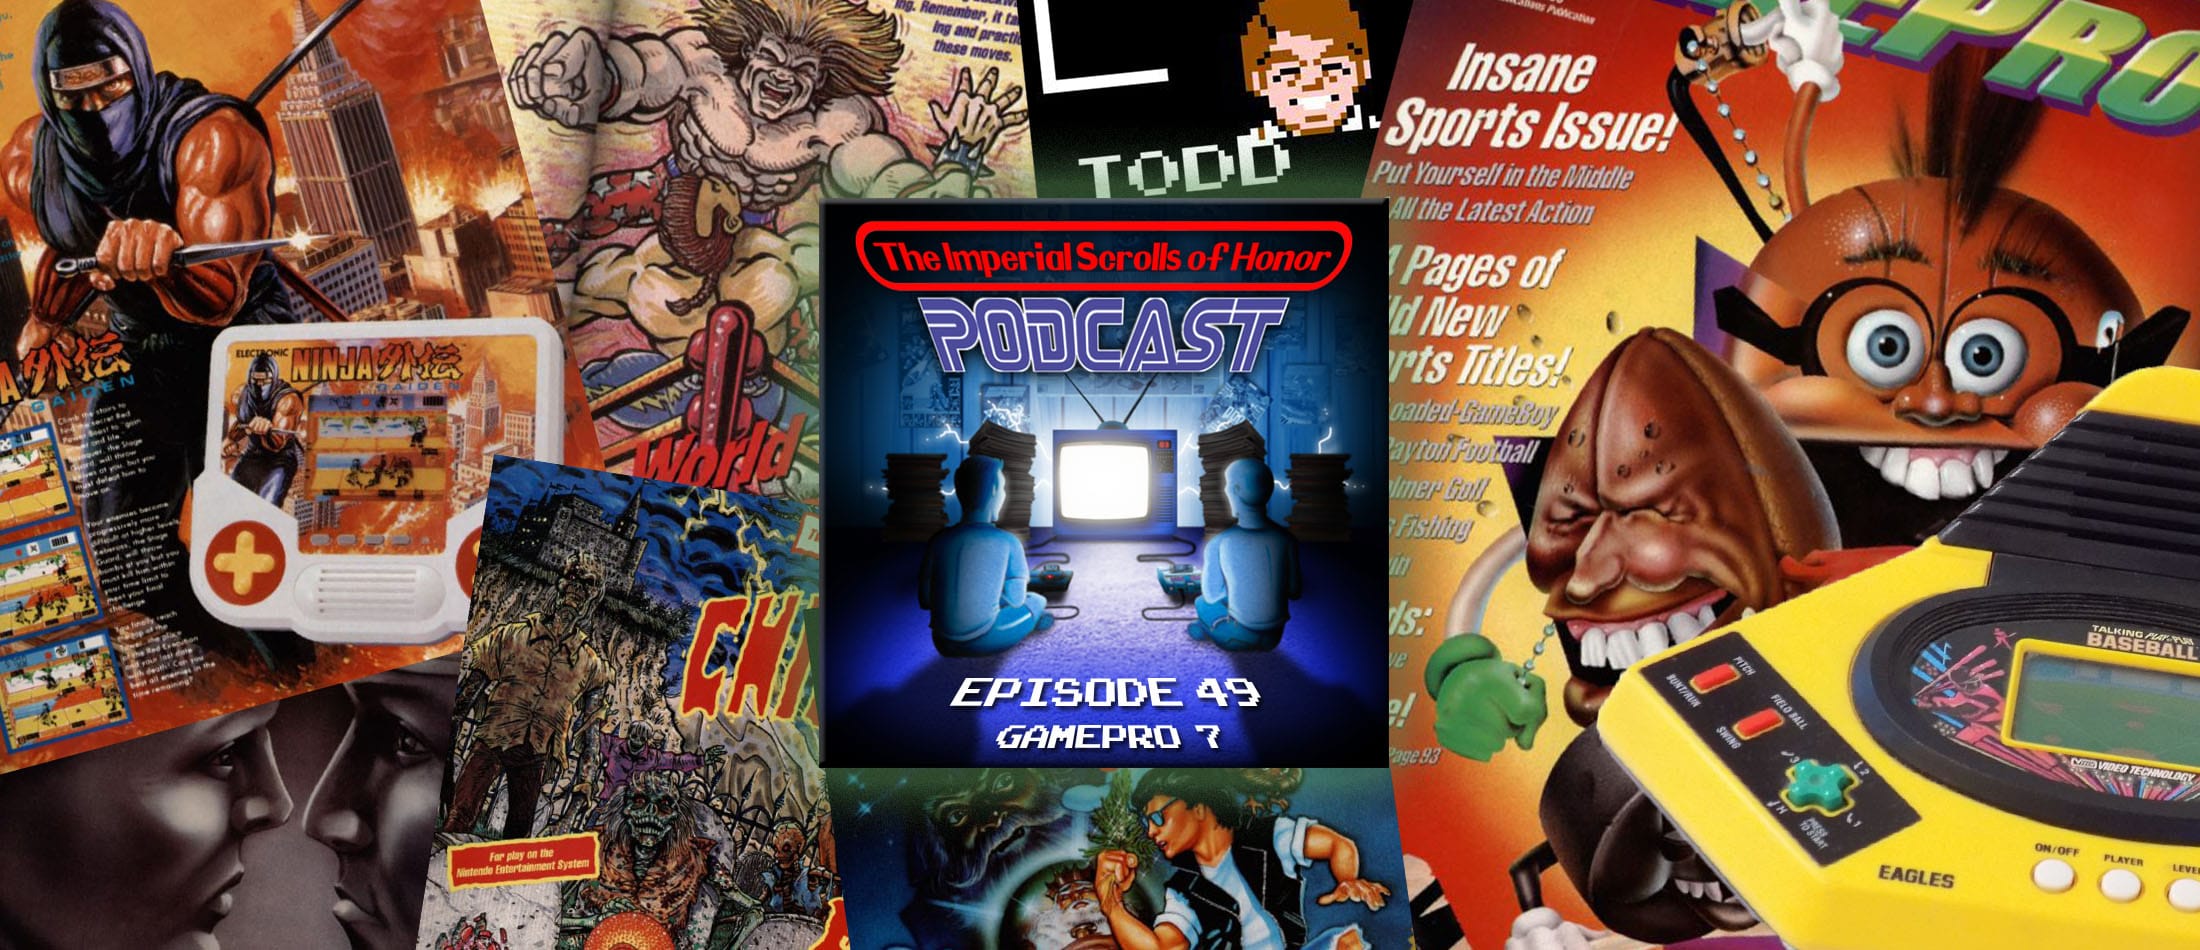 The Imperial Scrolls of Honor Podcast - Ep 49 - GamePro #7